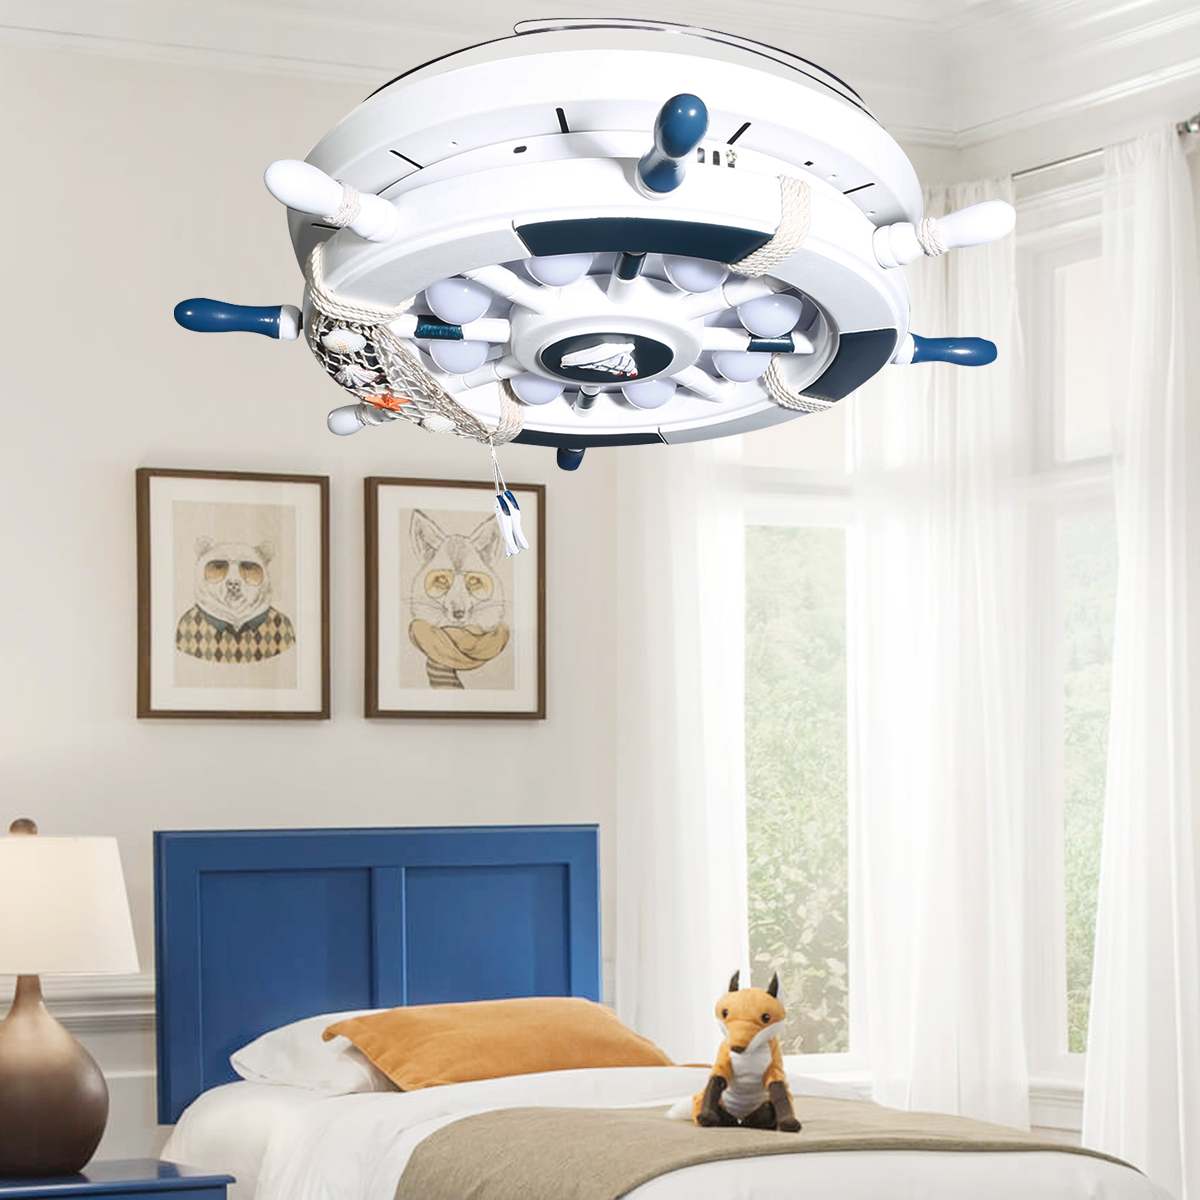 Details About 42 Children Room Ceiling Fan Light Remote Control Lamp Dimmable Led Chandelier